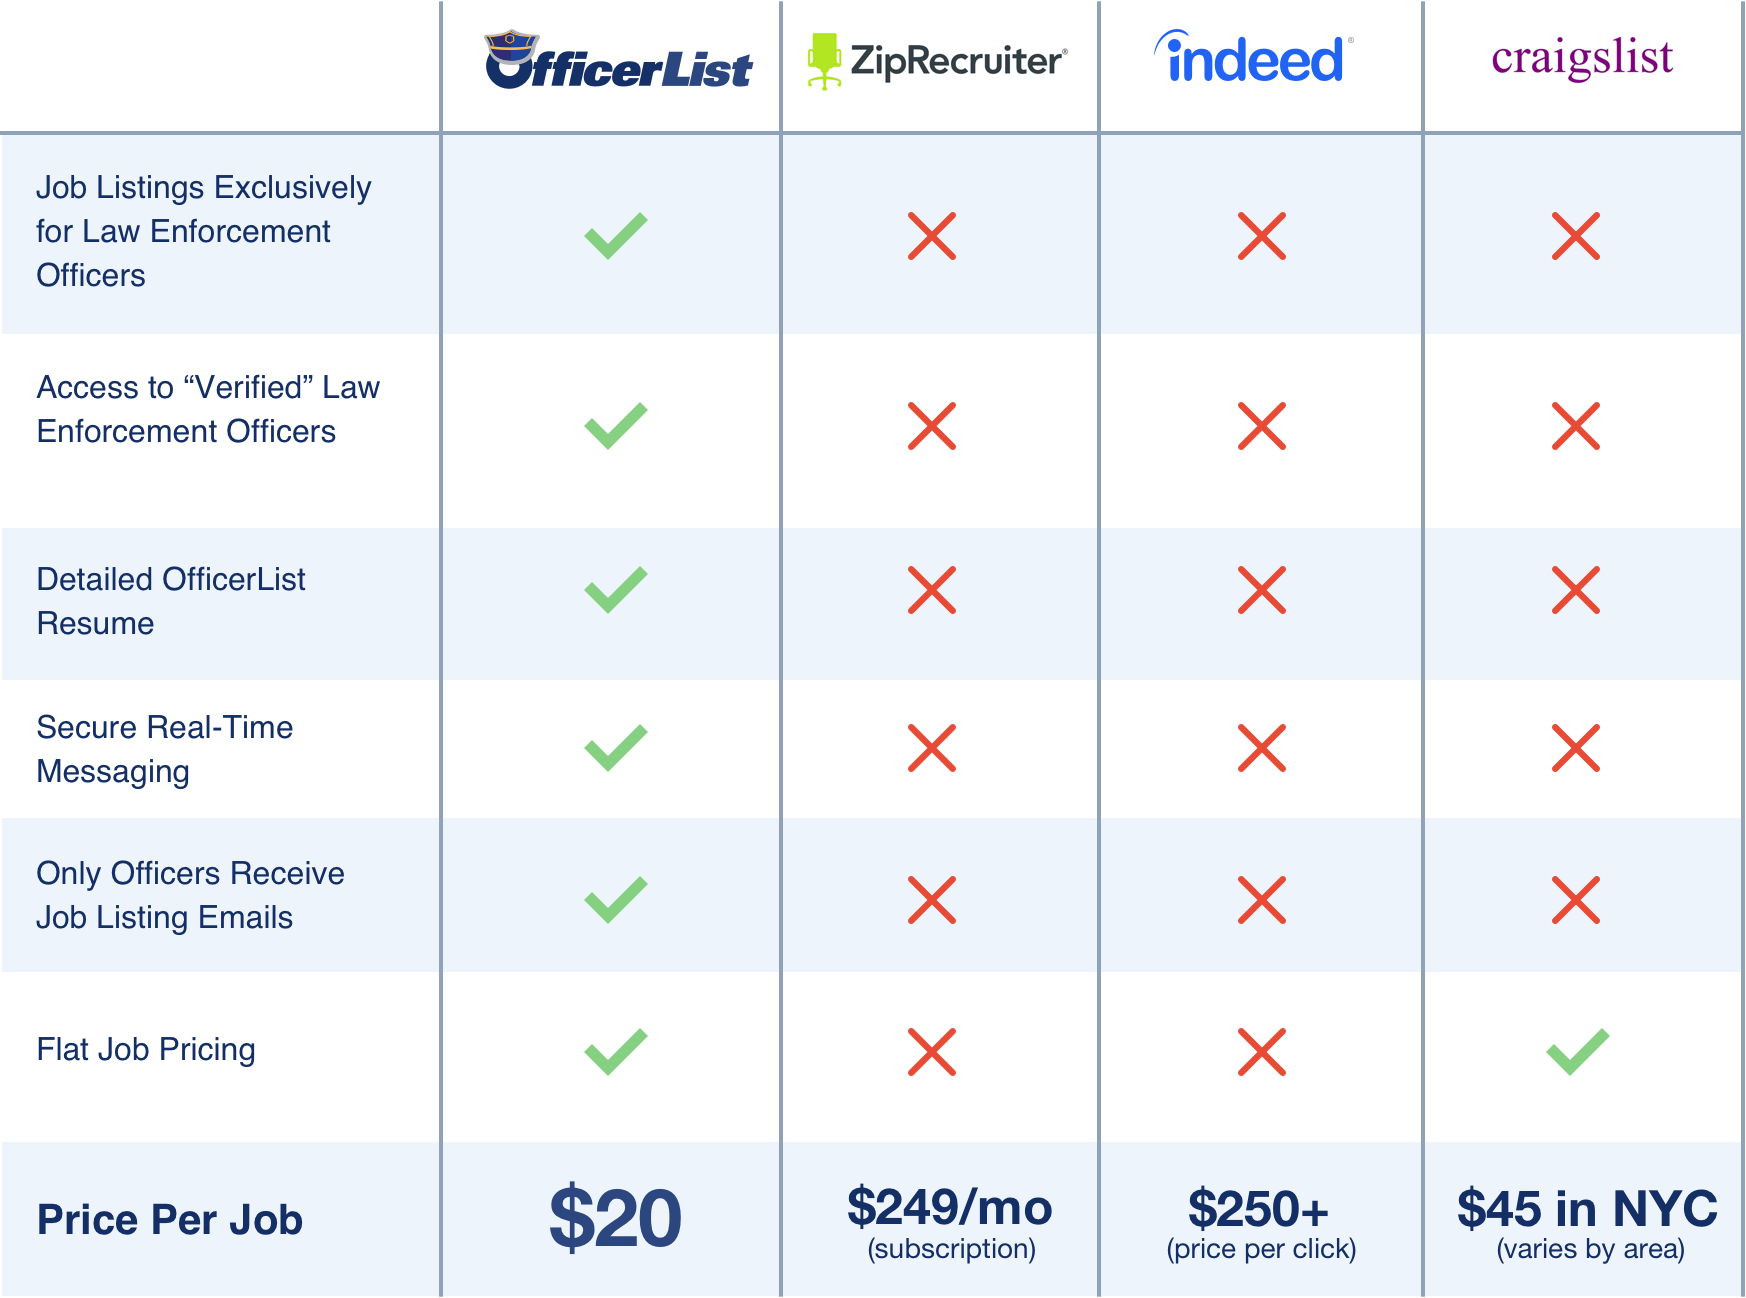 OfficerList pricing for employers is only $20 a job, compared to Indeed, LinkedIn, and Craigslist.